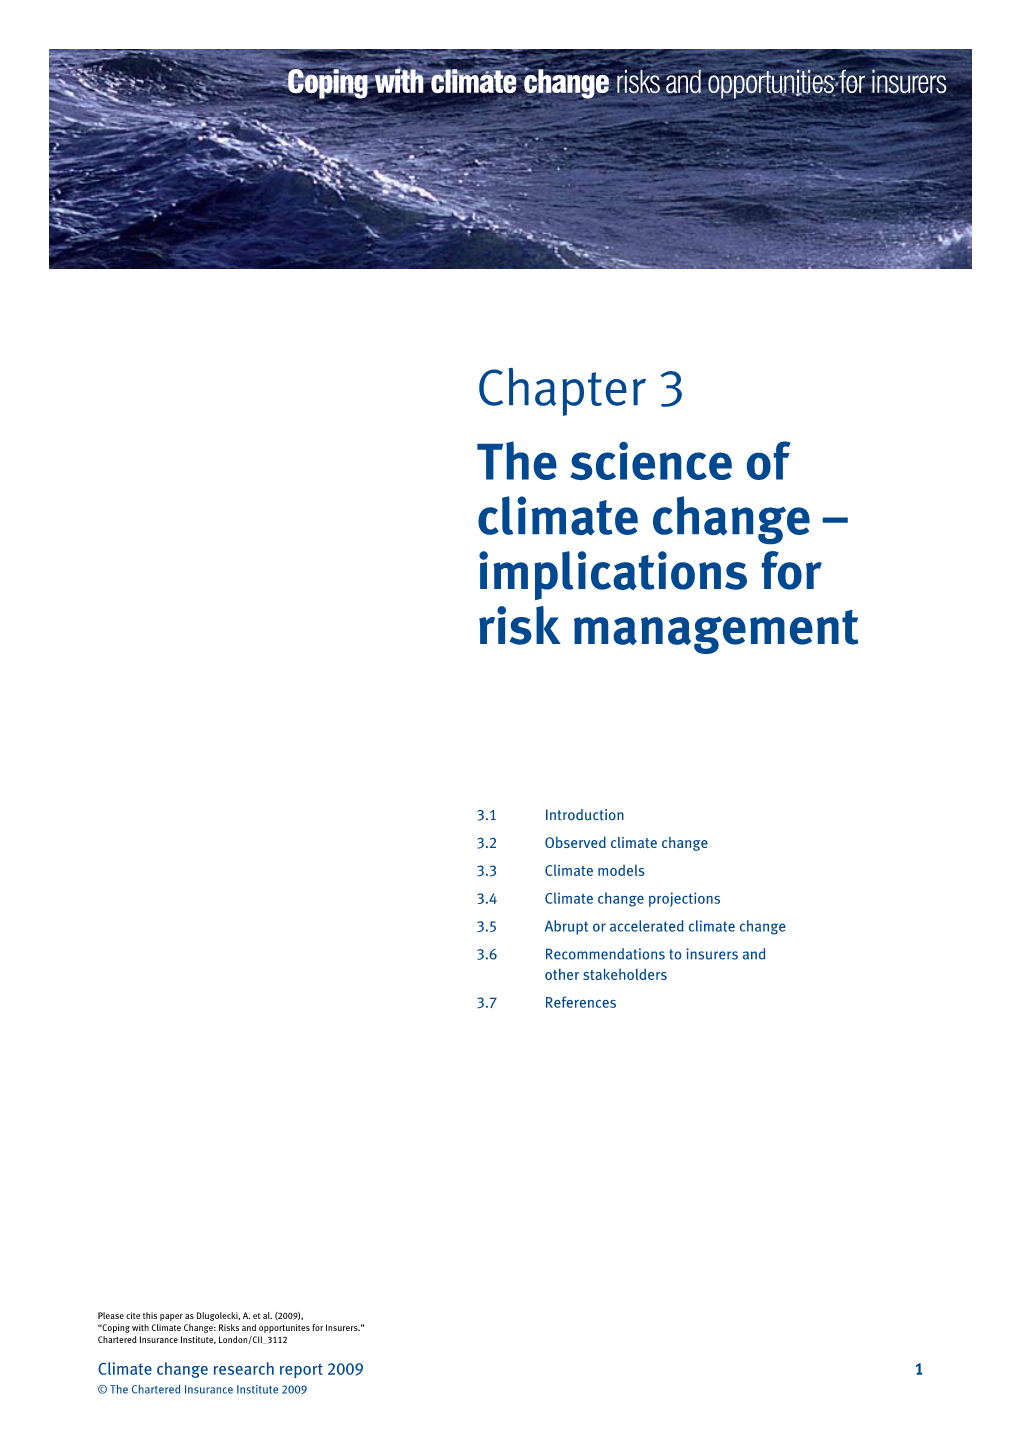 Chapter 3 the Science of Climate Change – Implications for Risk Management